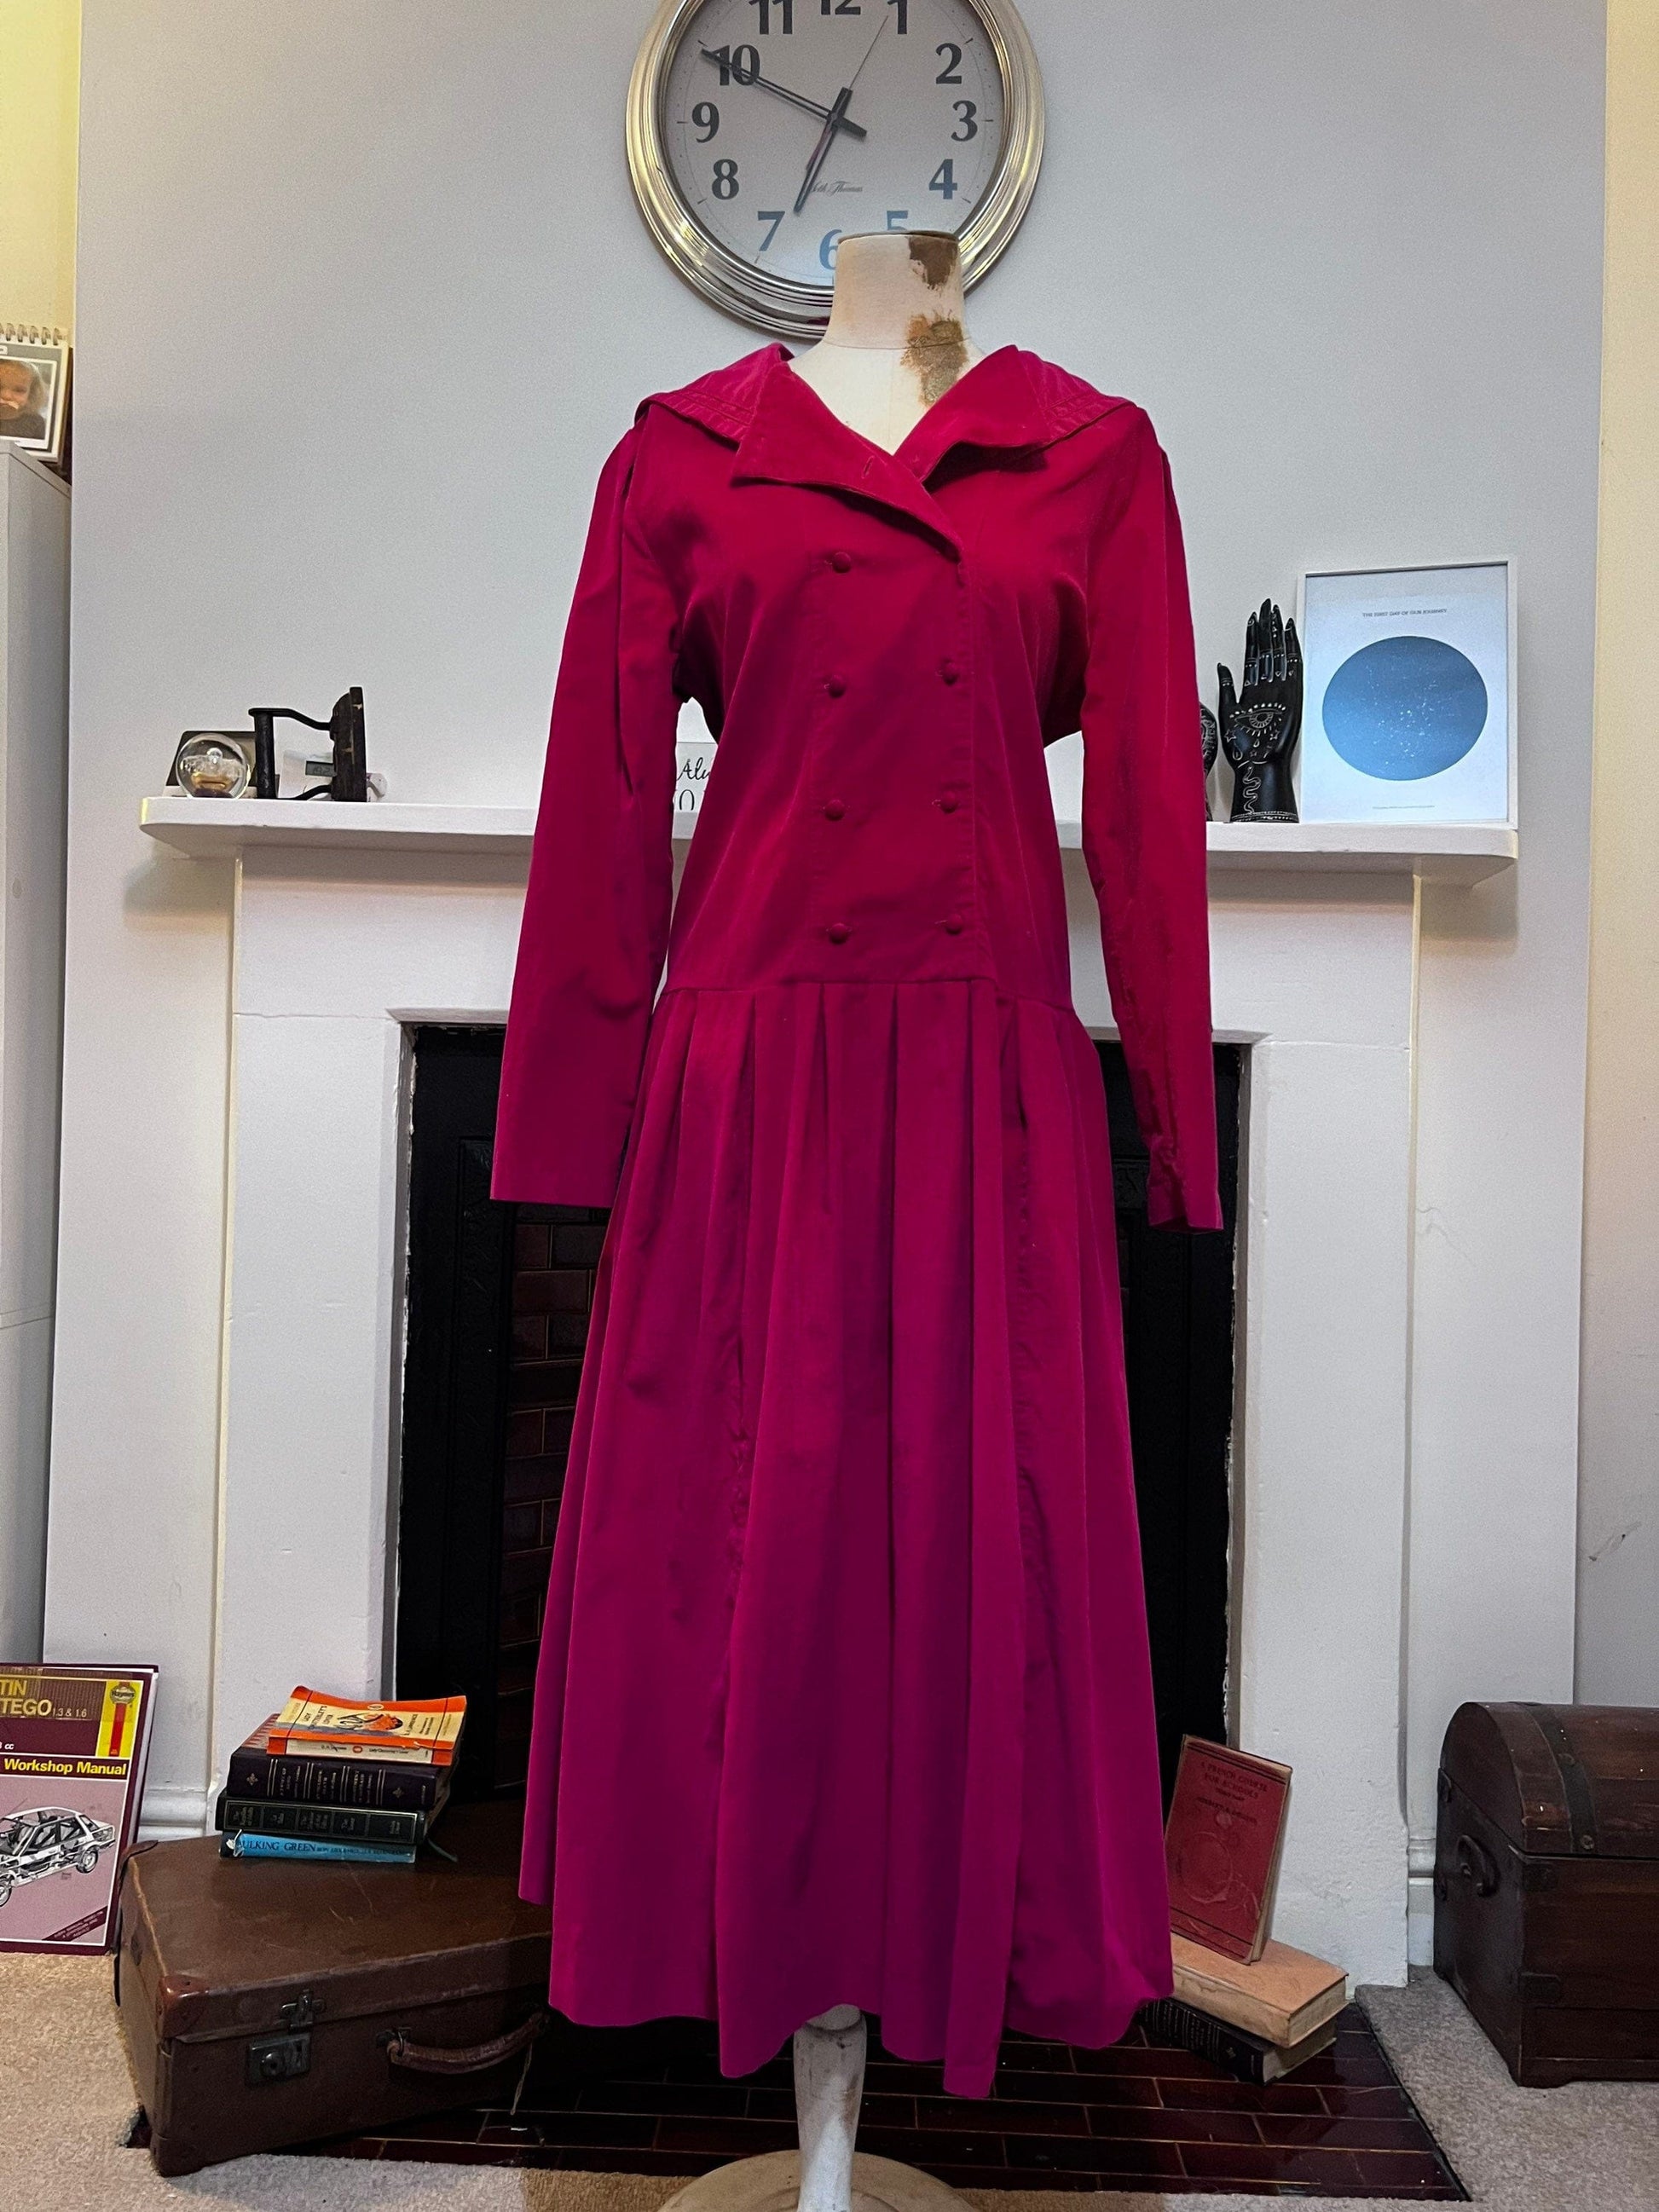 Vintage Laura Ashley Dress - Red Sailor Collar Dropped Waist Dress - UK16 - Red Needlecord - Made in Great Britain - Edwardian Style Vintage